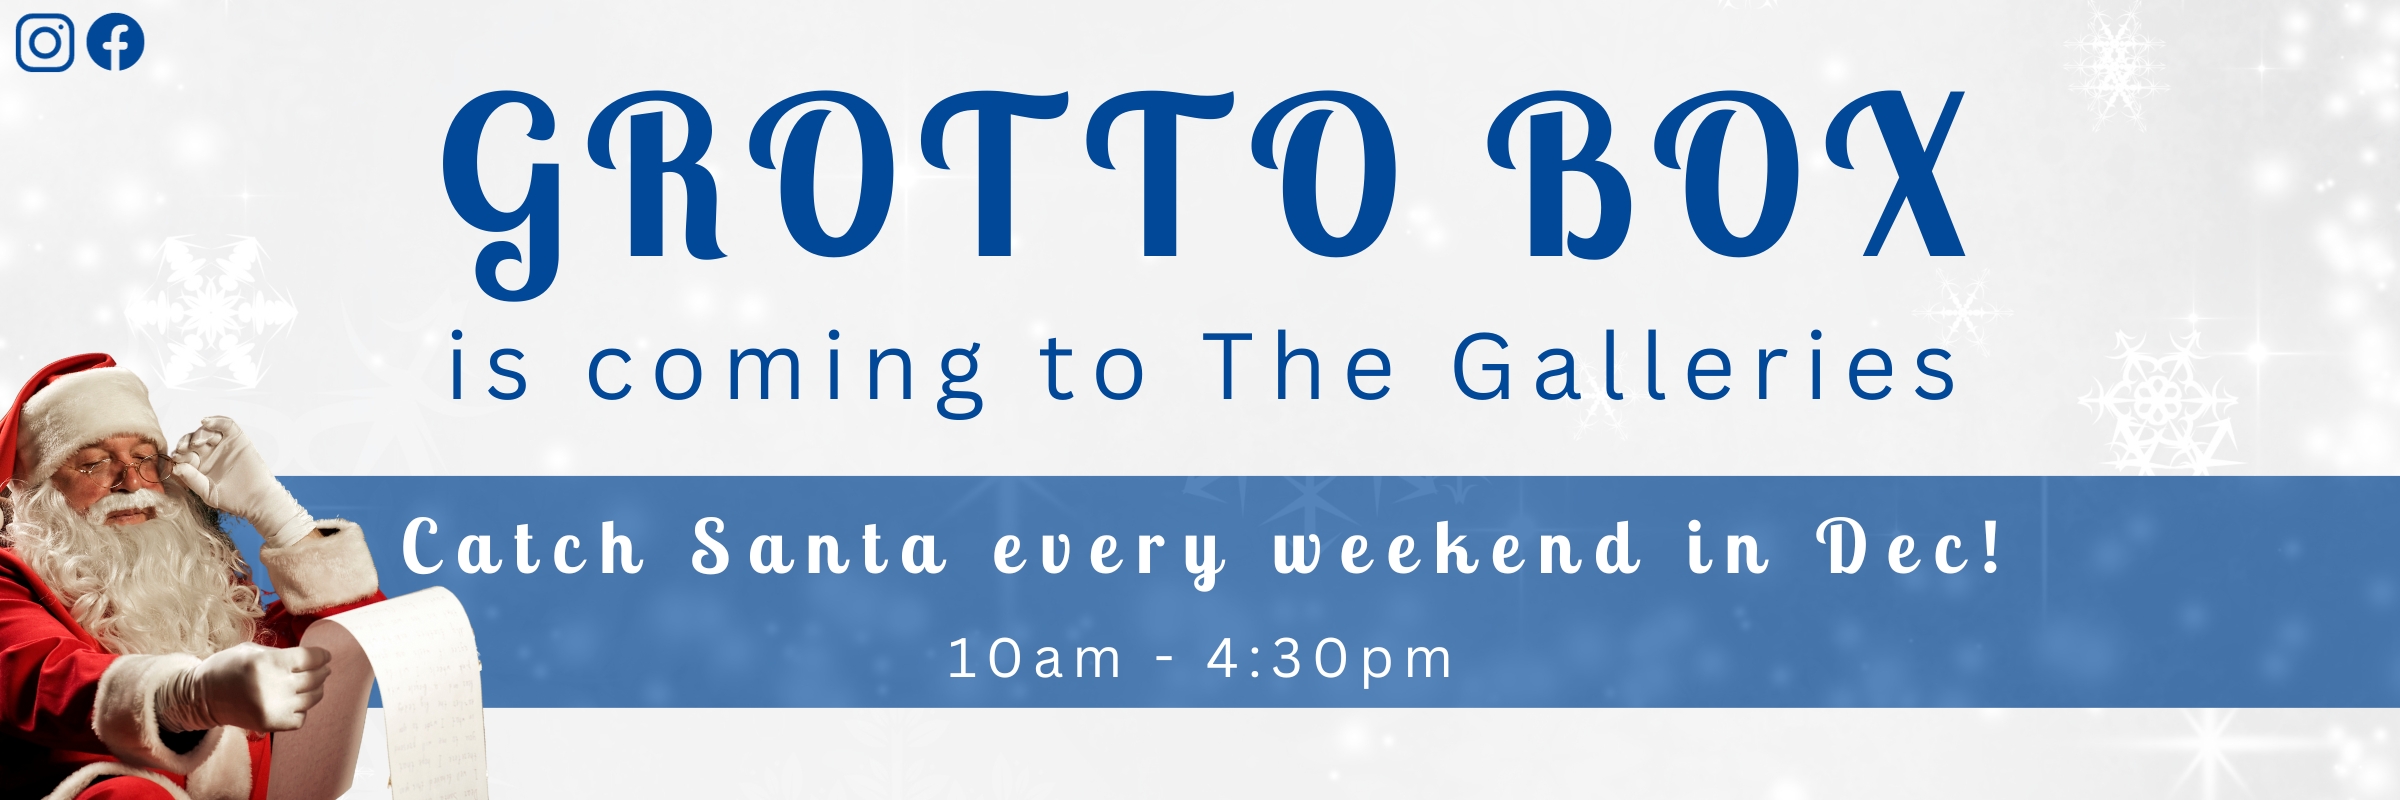 Grotto box is coming to The Galleries!